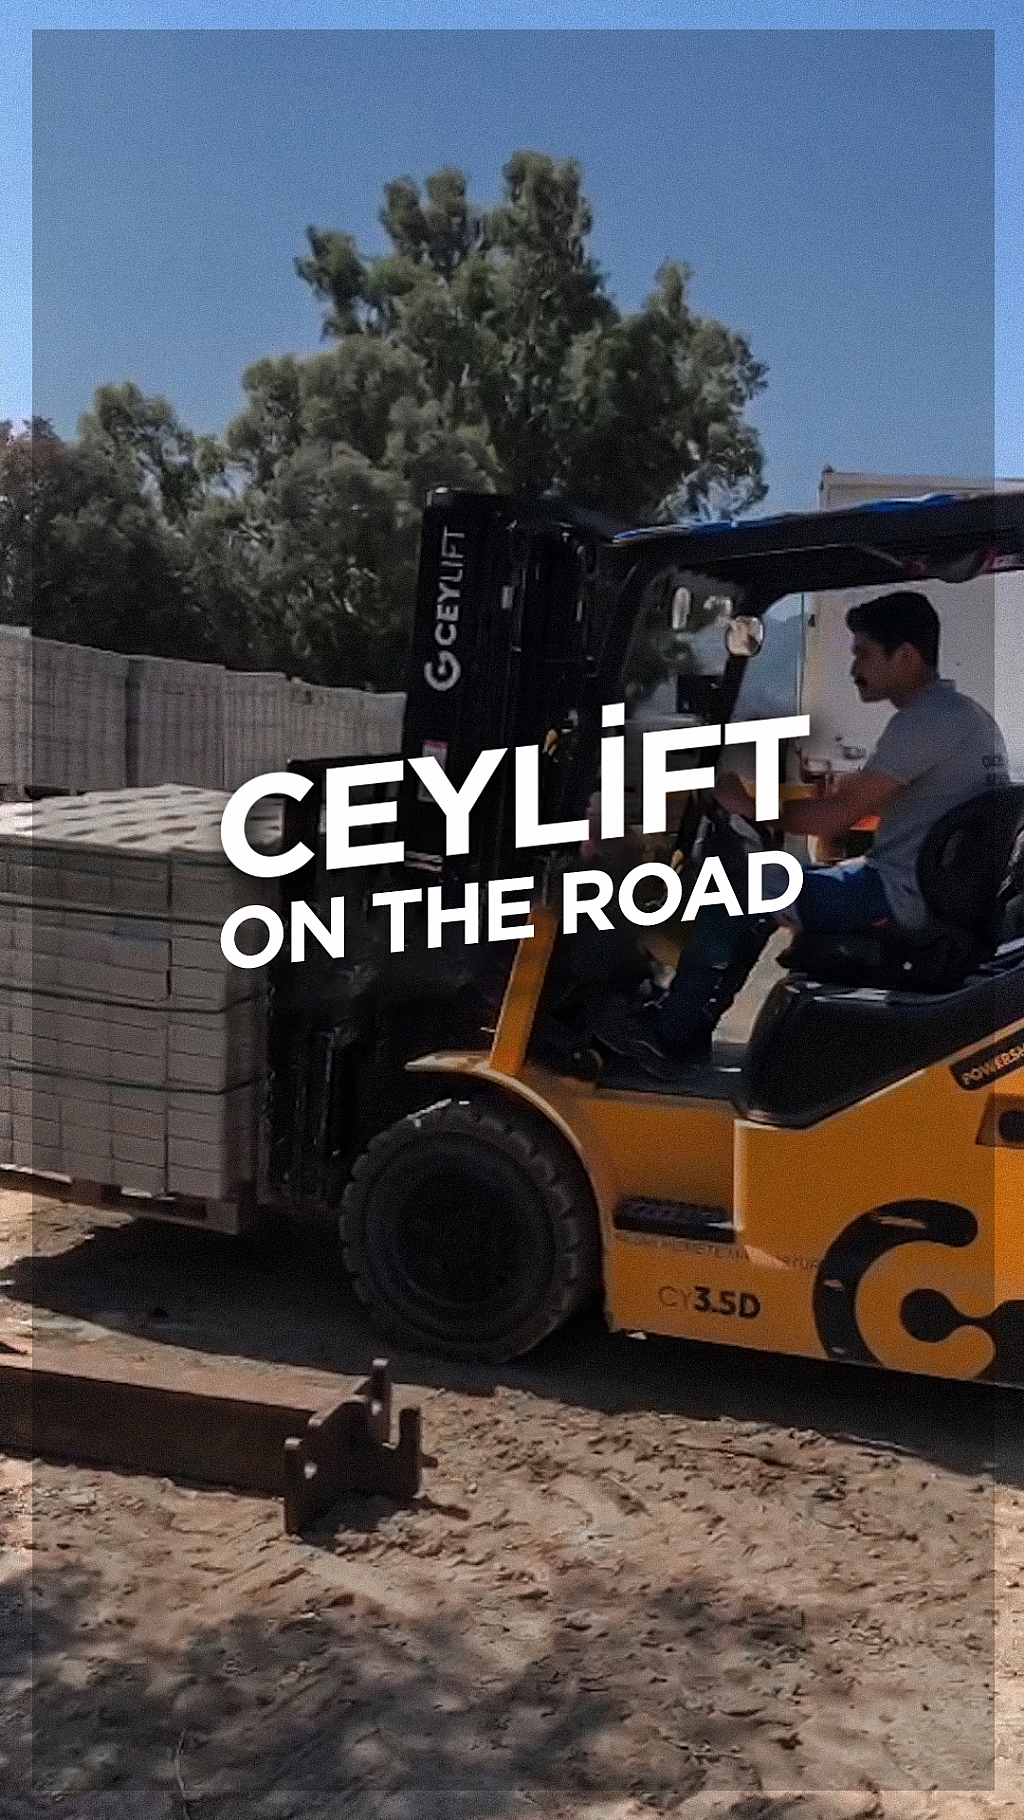 Videos - Ceylift on the road